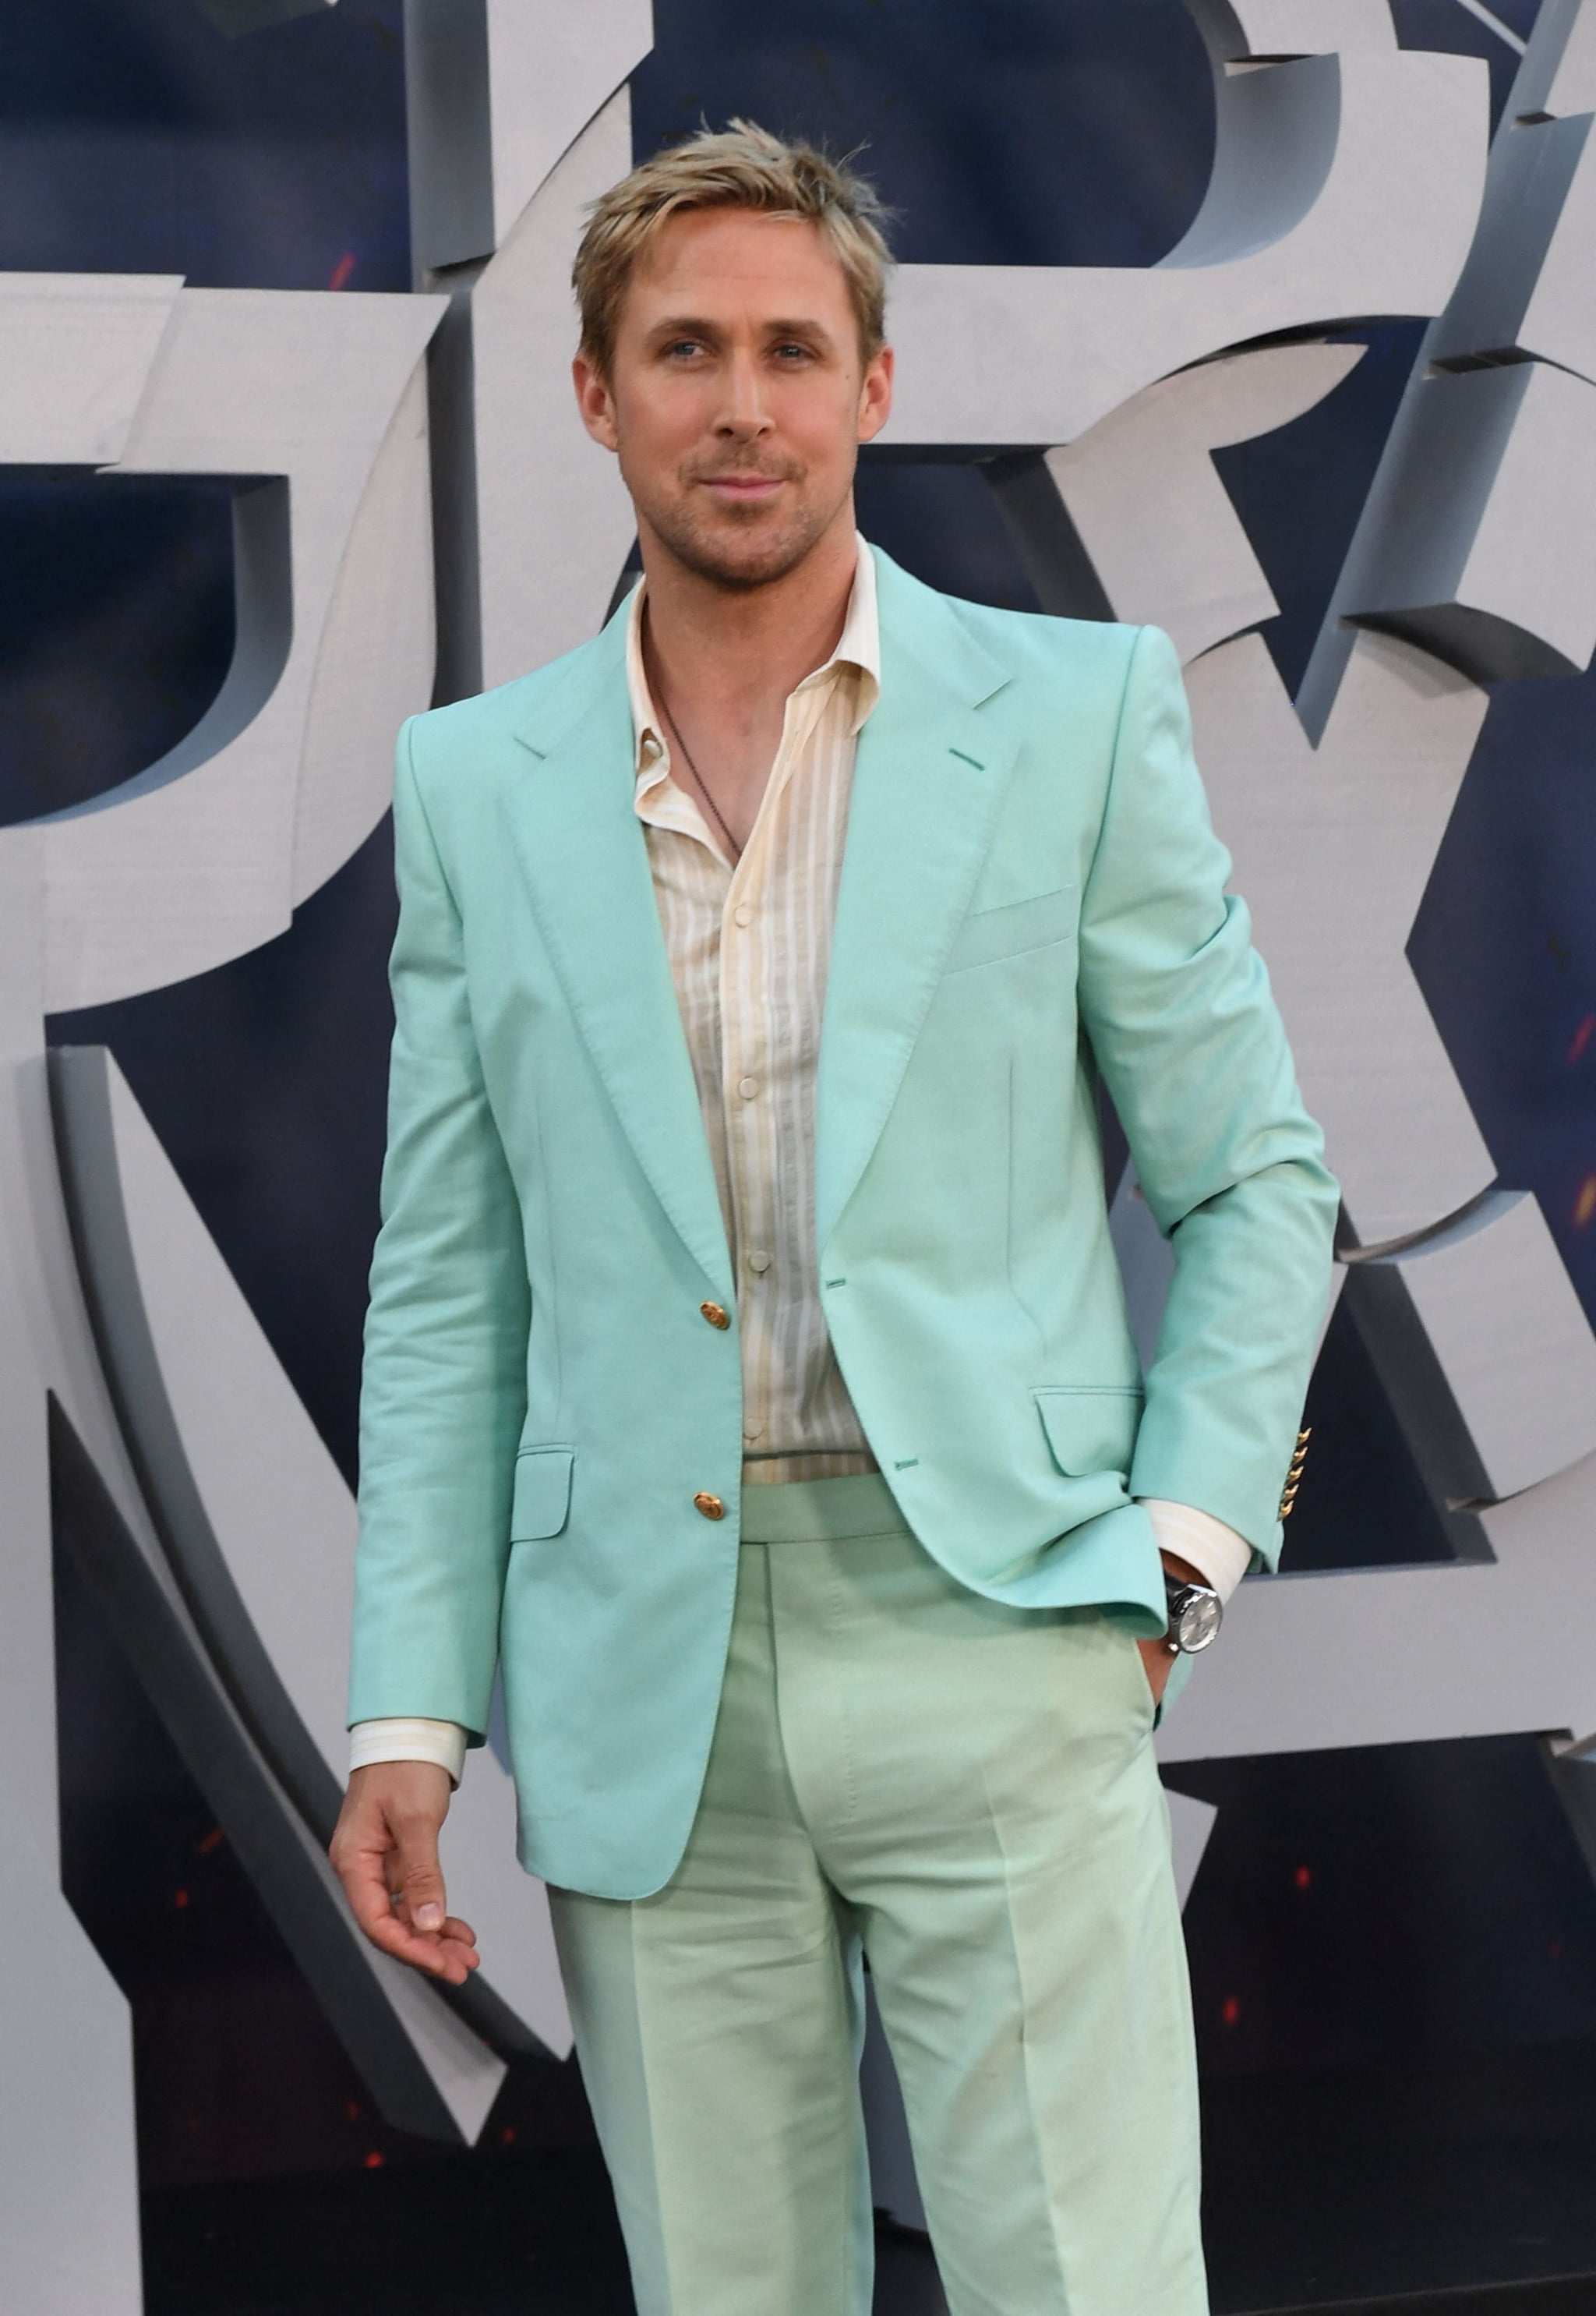 Get the Ultimate Ryan Gosling Style 2020: Top Fashion Tips Revealed!